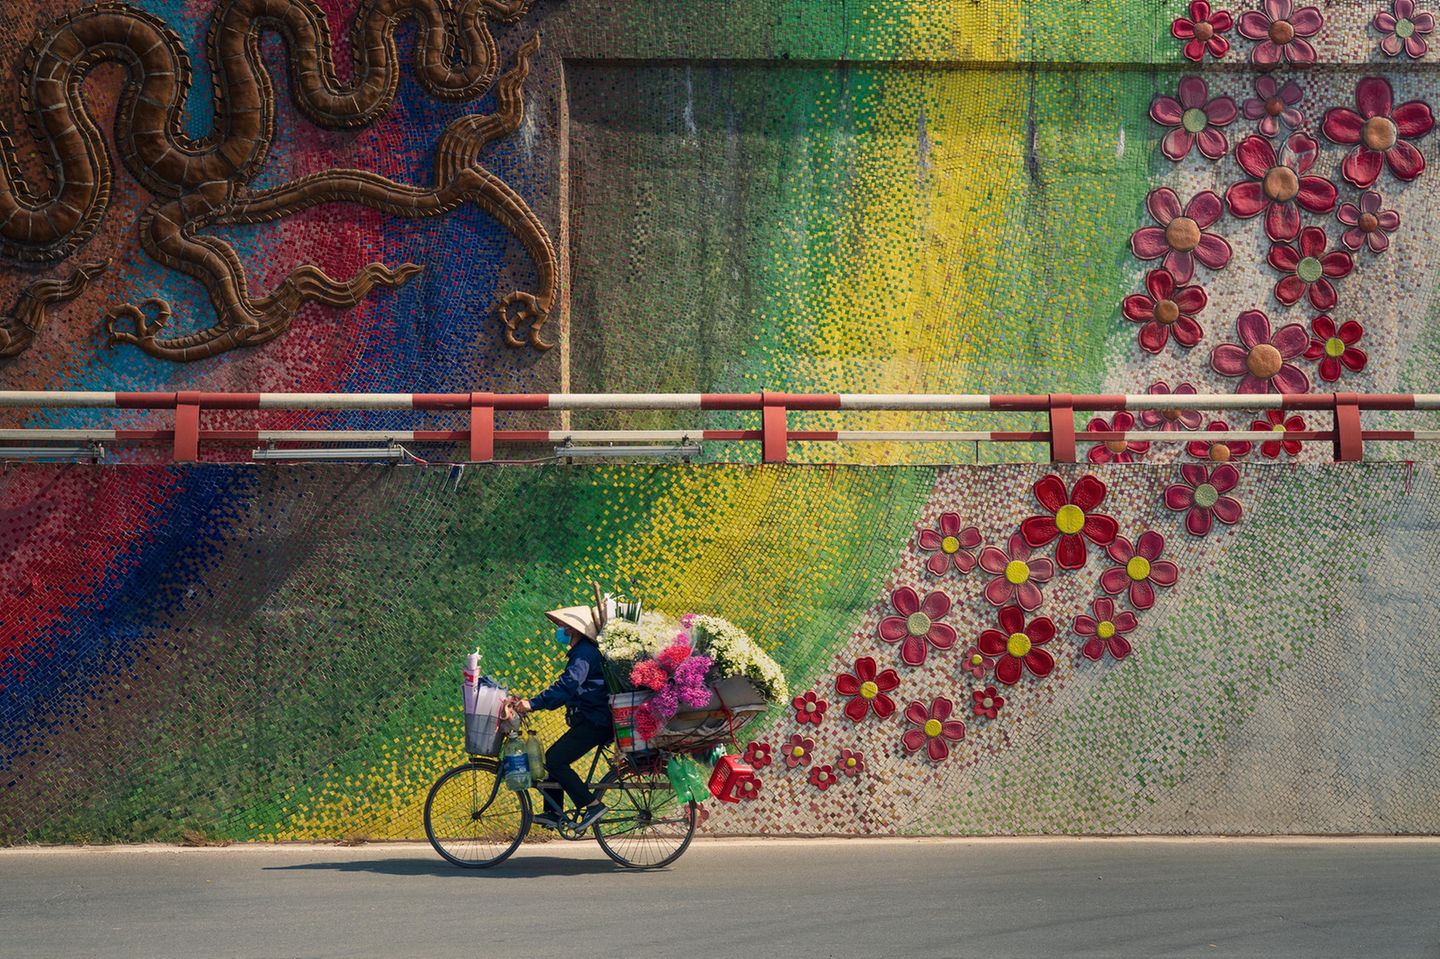 Image Name: Bike with Flowers  Photographer Name: Thanh Nguyen Phuc  Year: 2022  Image Description: <p>A hundred years ago there were just 36 streets and now there are many more, but the street culture remains strong in Hanoi. There are lots of shops in the main streets but people in the old streets prefer to get serviced by mobile street vendors. I spent a weekend following street vendors and found that they were walking or riding their bikes all day. Here is one of my favourite moments.</p>  Copyright: © Thanh Nguyen Phuc, Vietnam, Winner, National Awards, Travel, 2022 Sony World Photography Awards